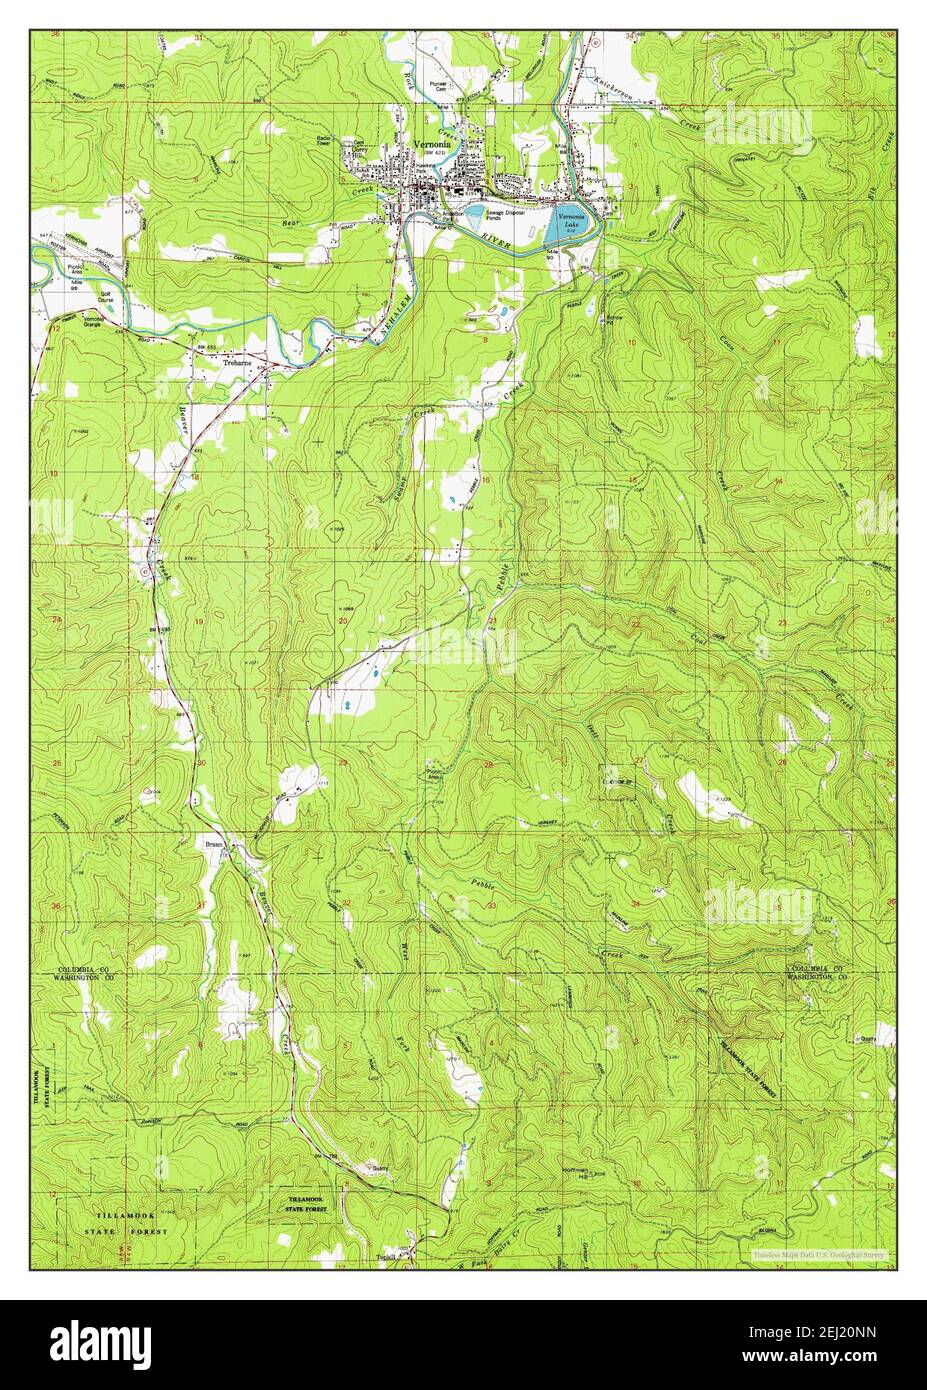 Vernonia, Oregon, map 1979, 1:24000, United States of America by Timeless Maps, data U.S. Geological Survey Stock Photo